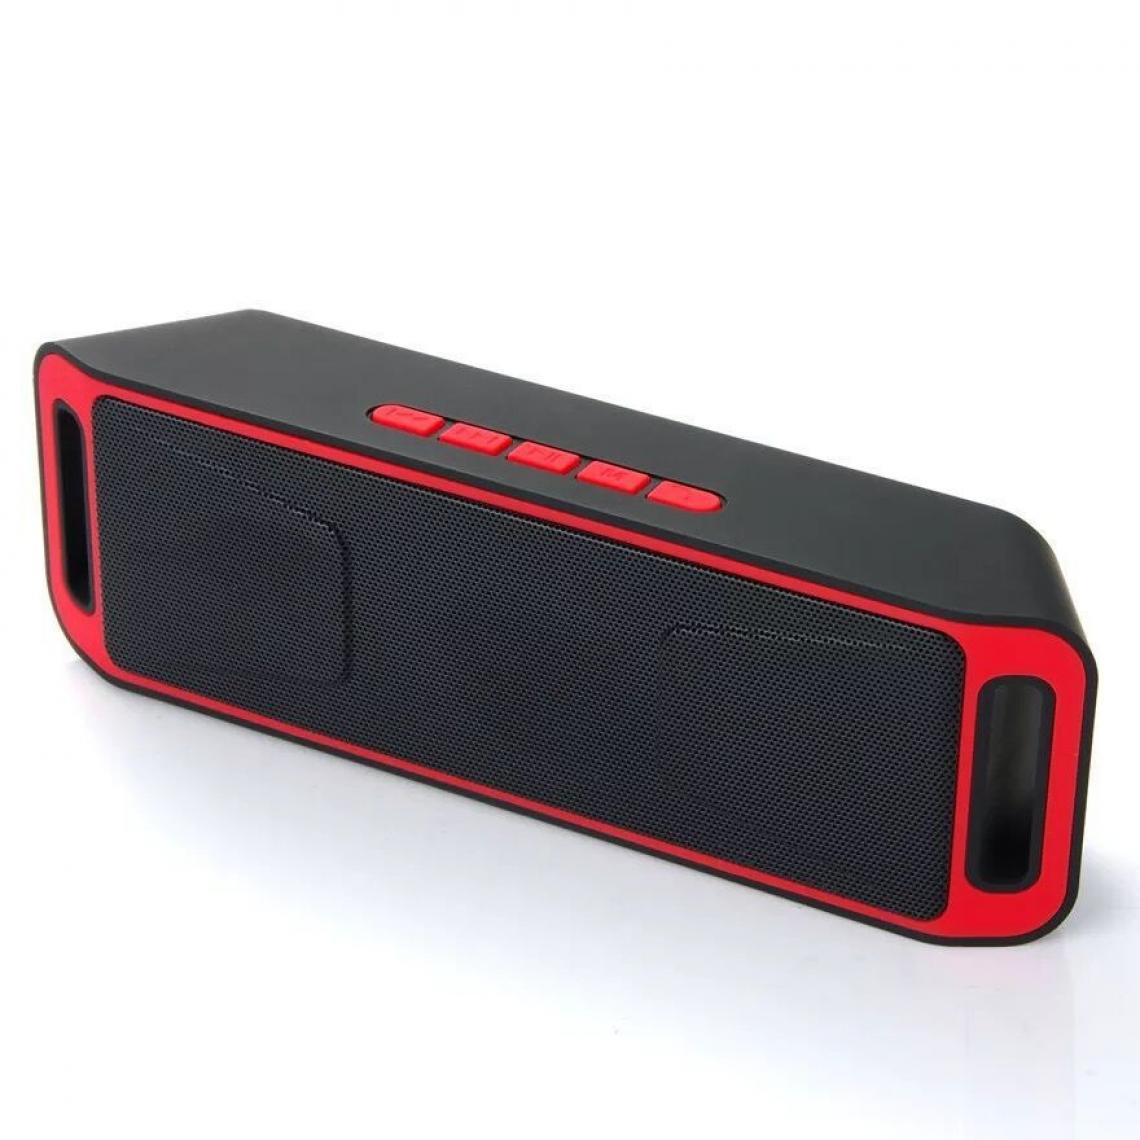 Universal - Portable Wireless Outdoor Bluetooth Speaker Bass Stéréo Sound Subwoofer FM Radio MP3 Player USB TF for Computer Smartphone | Portable Speaker (Red) - Enceinte PC